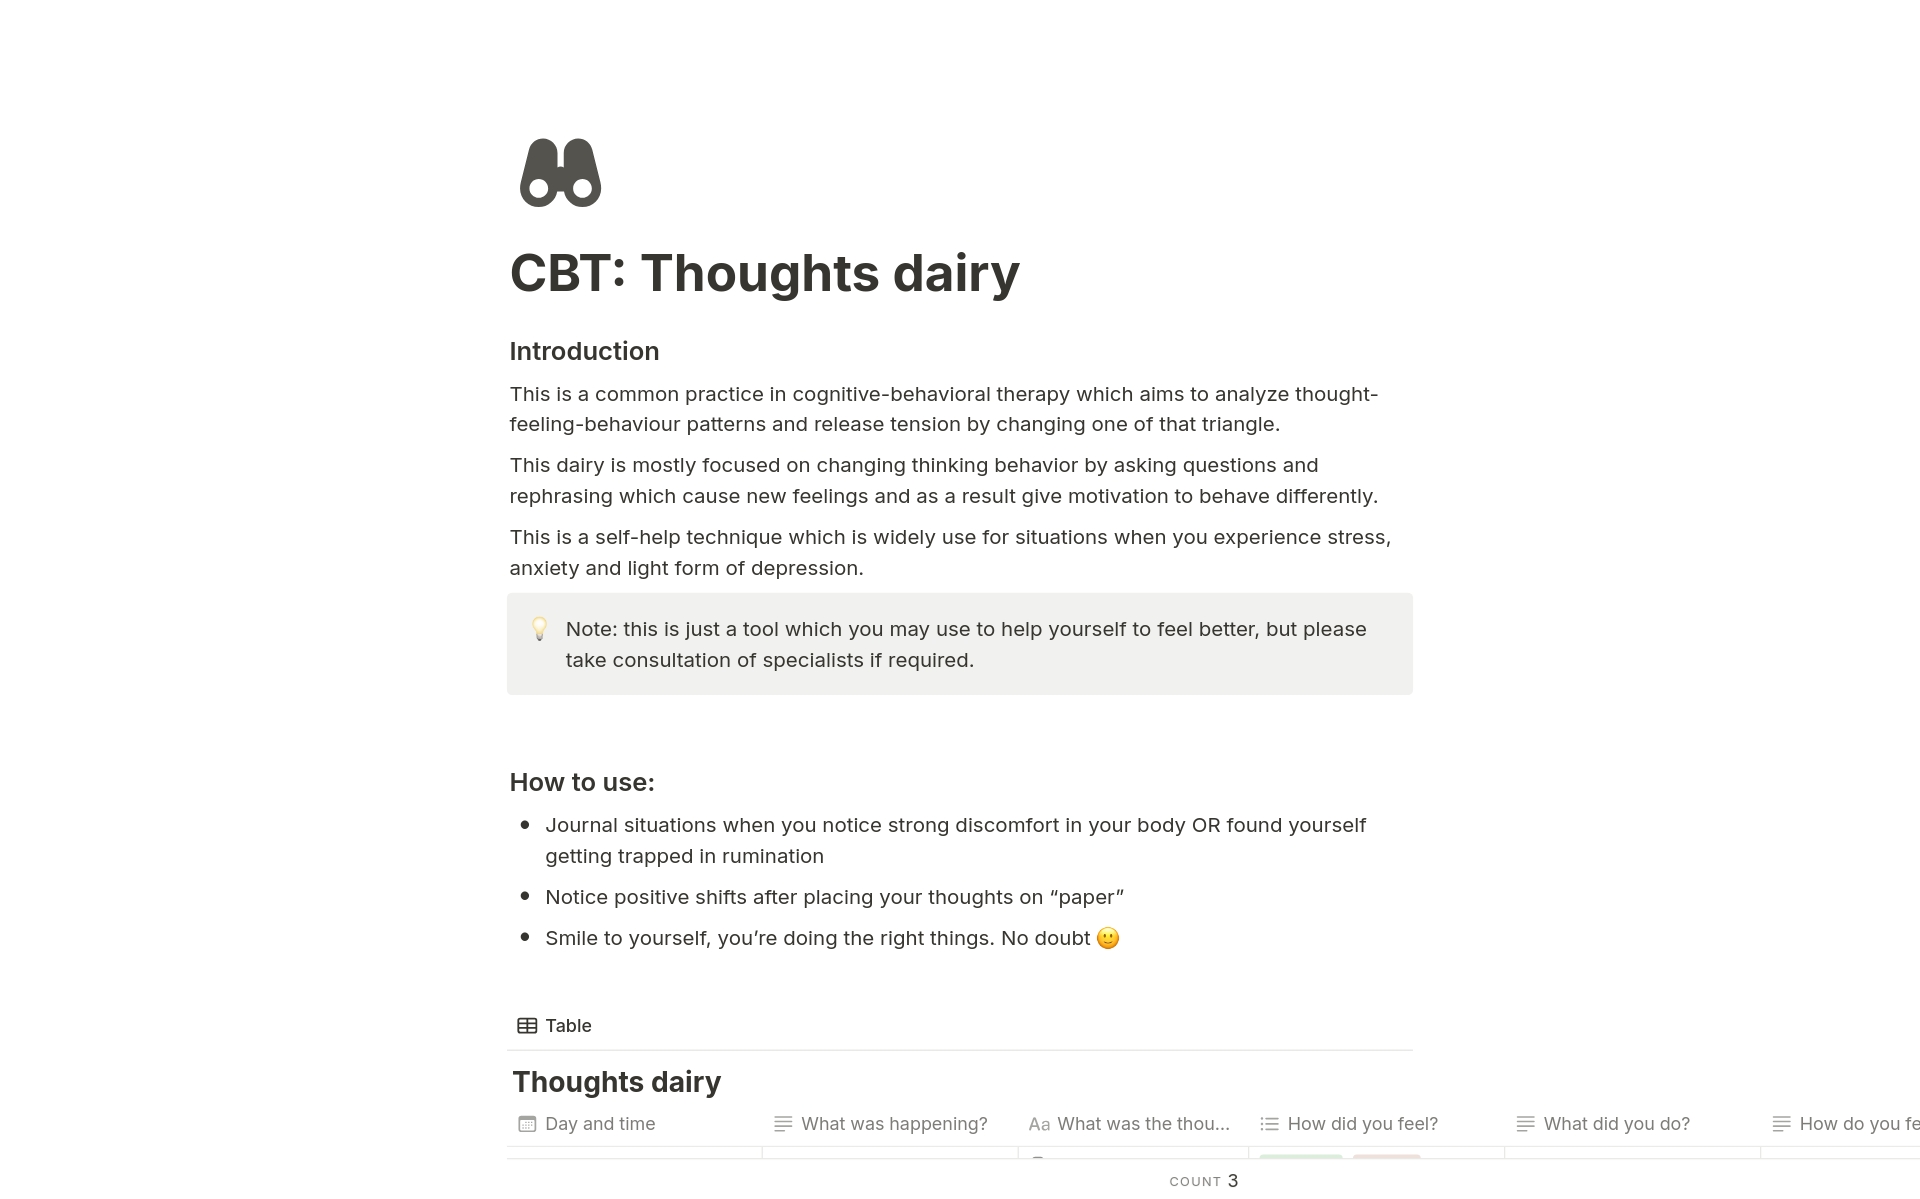 This template represents thought-dairy practice commonly used in cognitive-behavioral therapy (CBT) which I find useful to overcome tough times. 